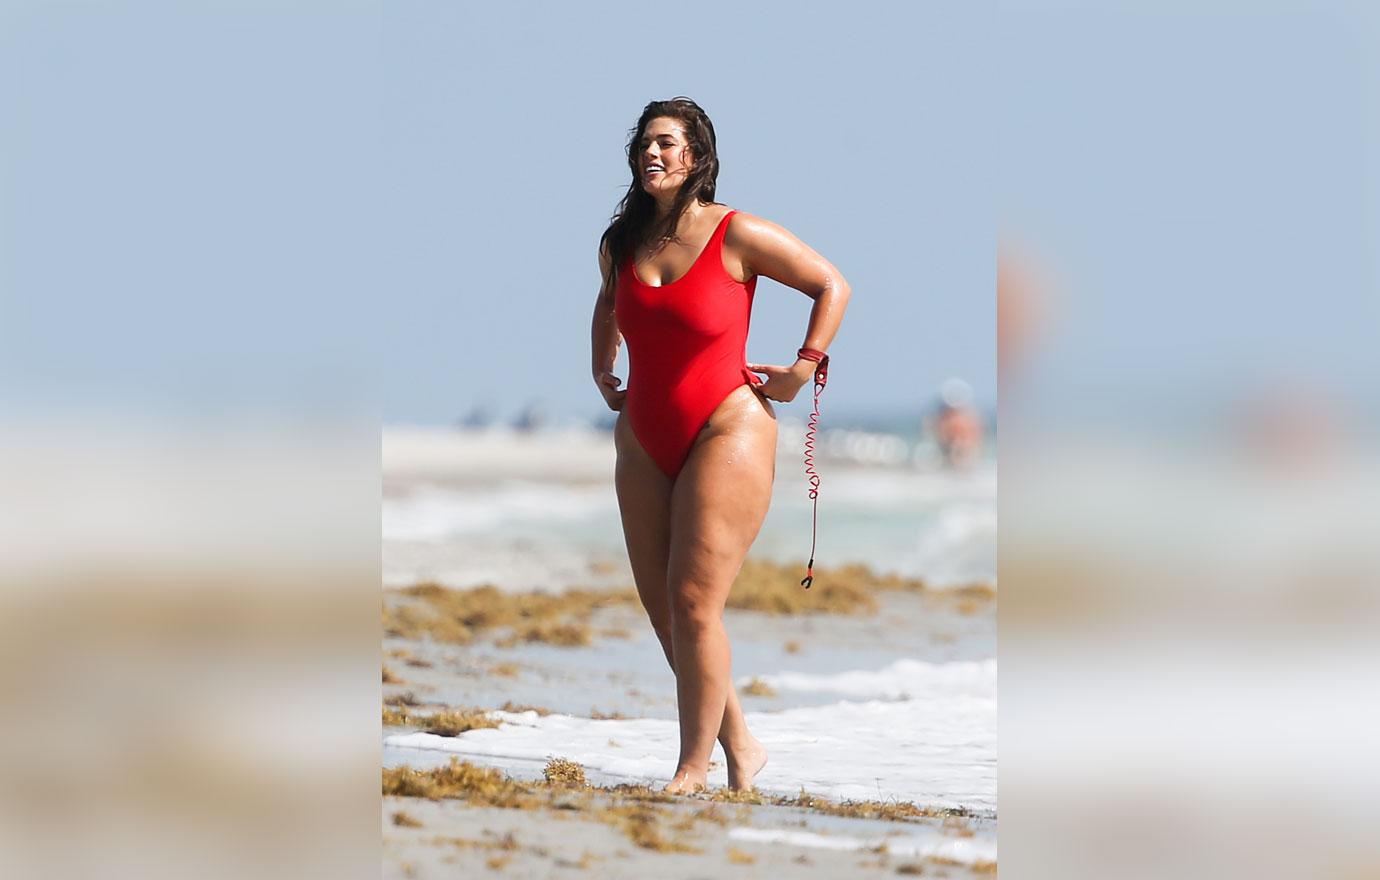 Ashley Graham Plus Size Model Boobs Butt Photos -- Sports Illustrated Girl  In A Red Suit Miami